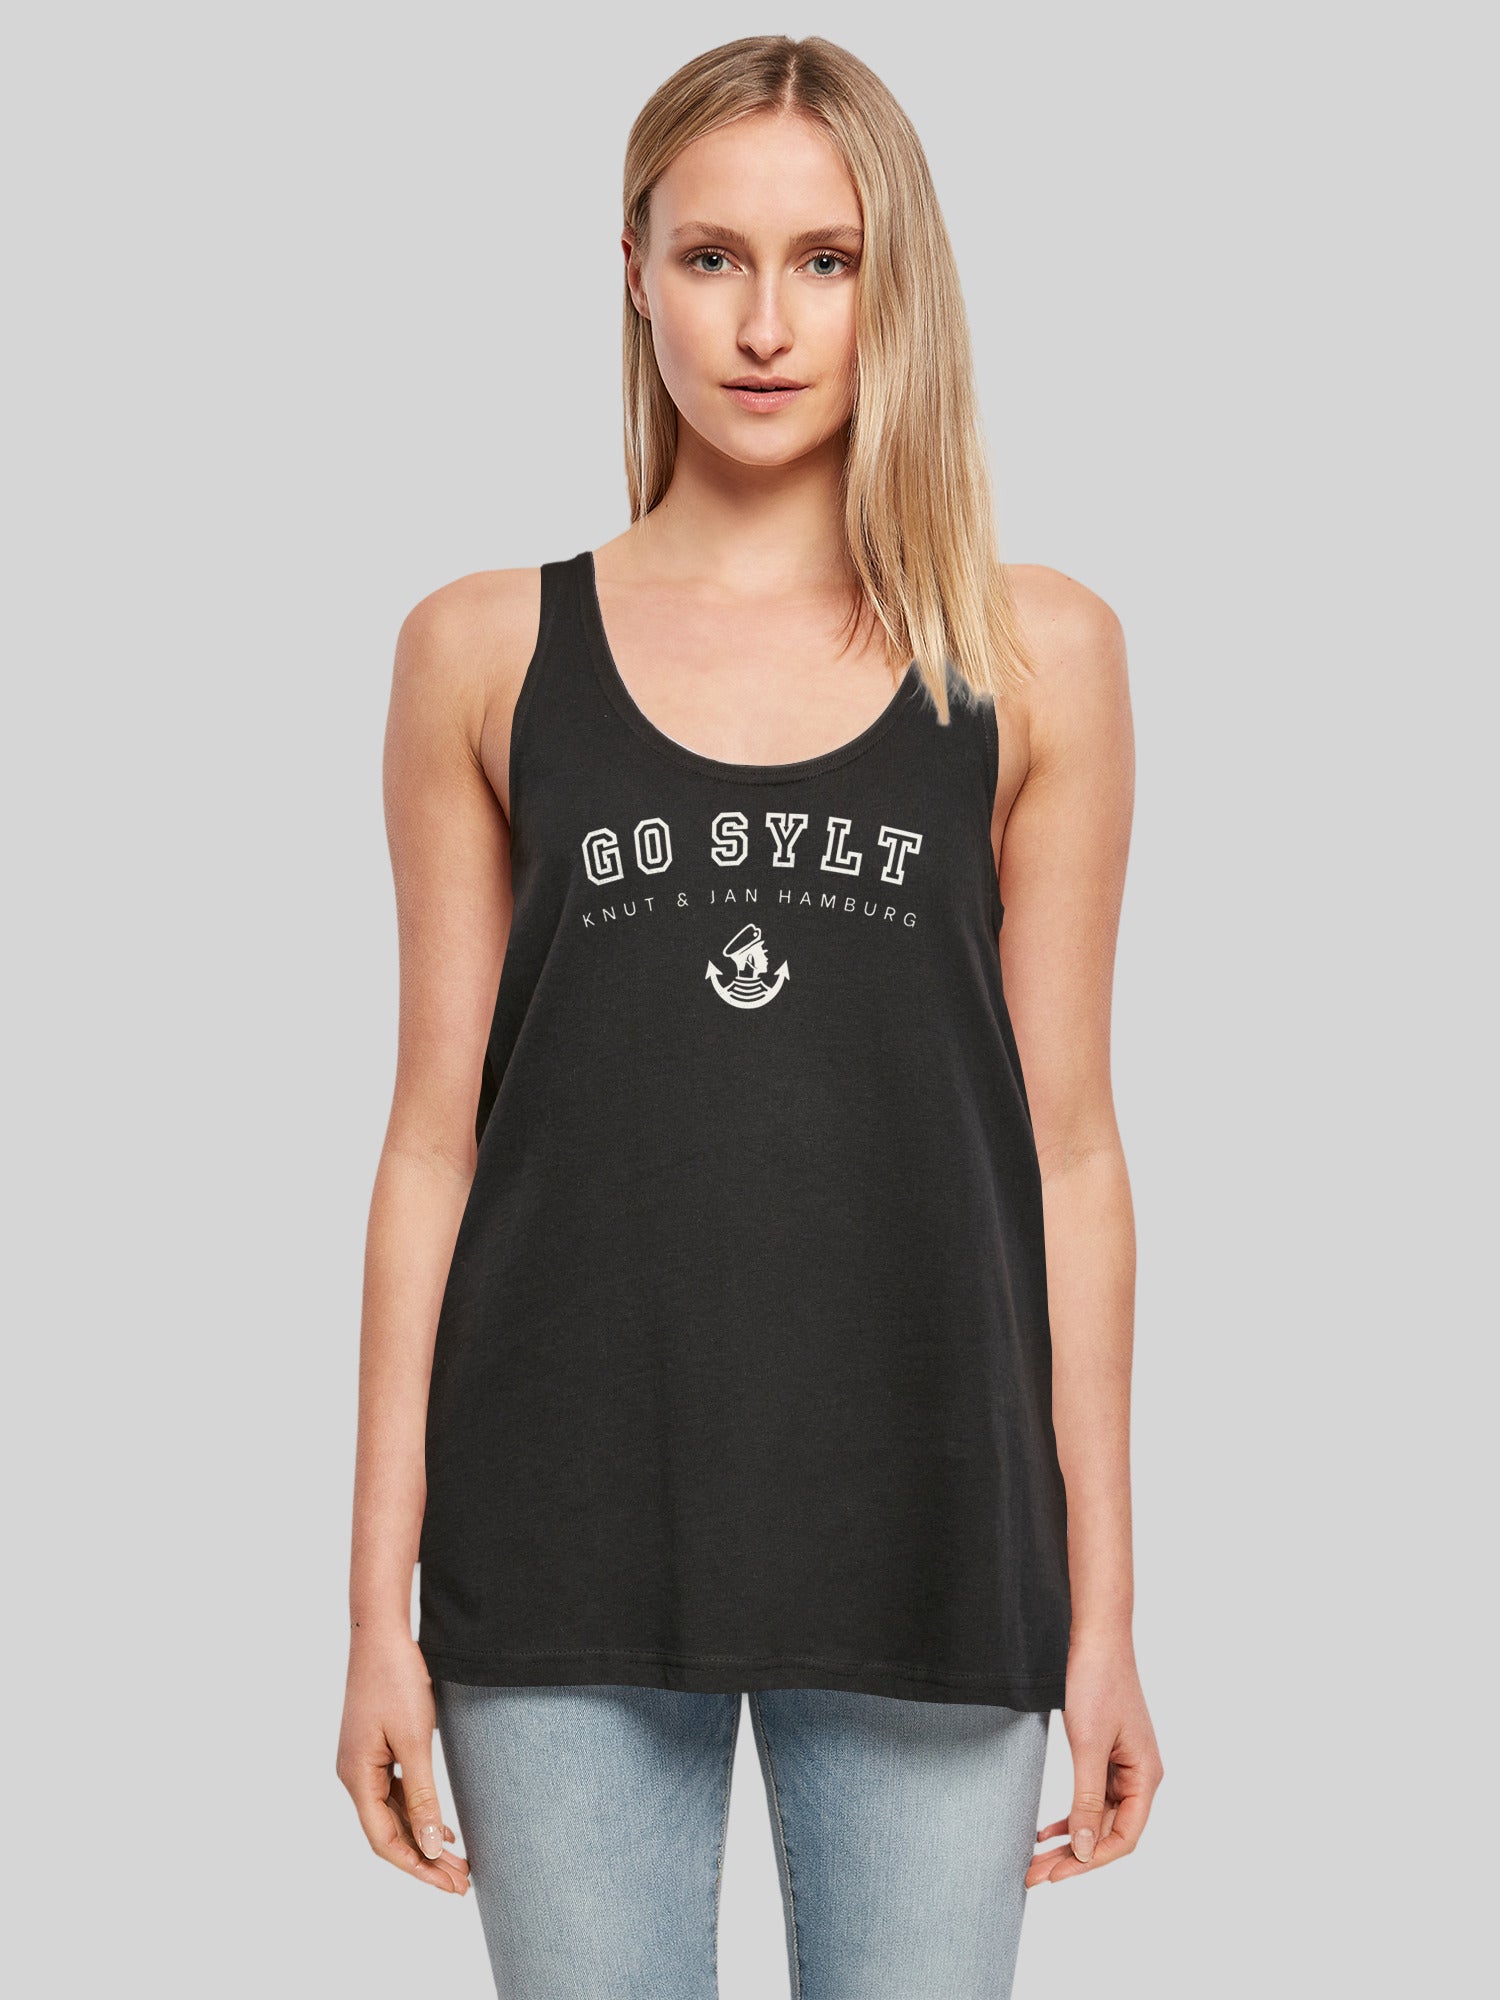 Queen Classic Crest Blk with Ladies Tanktop – F4NT4STIC | T-Shirts